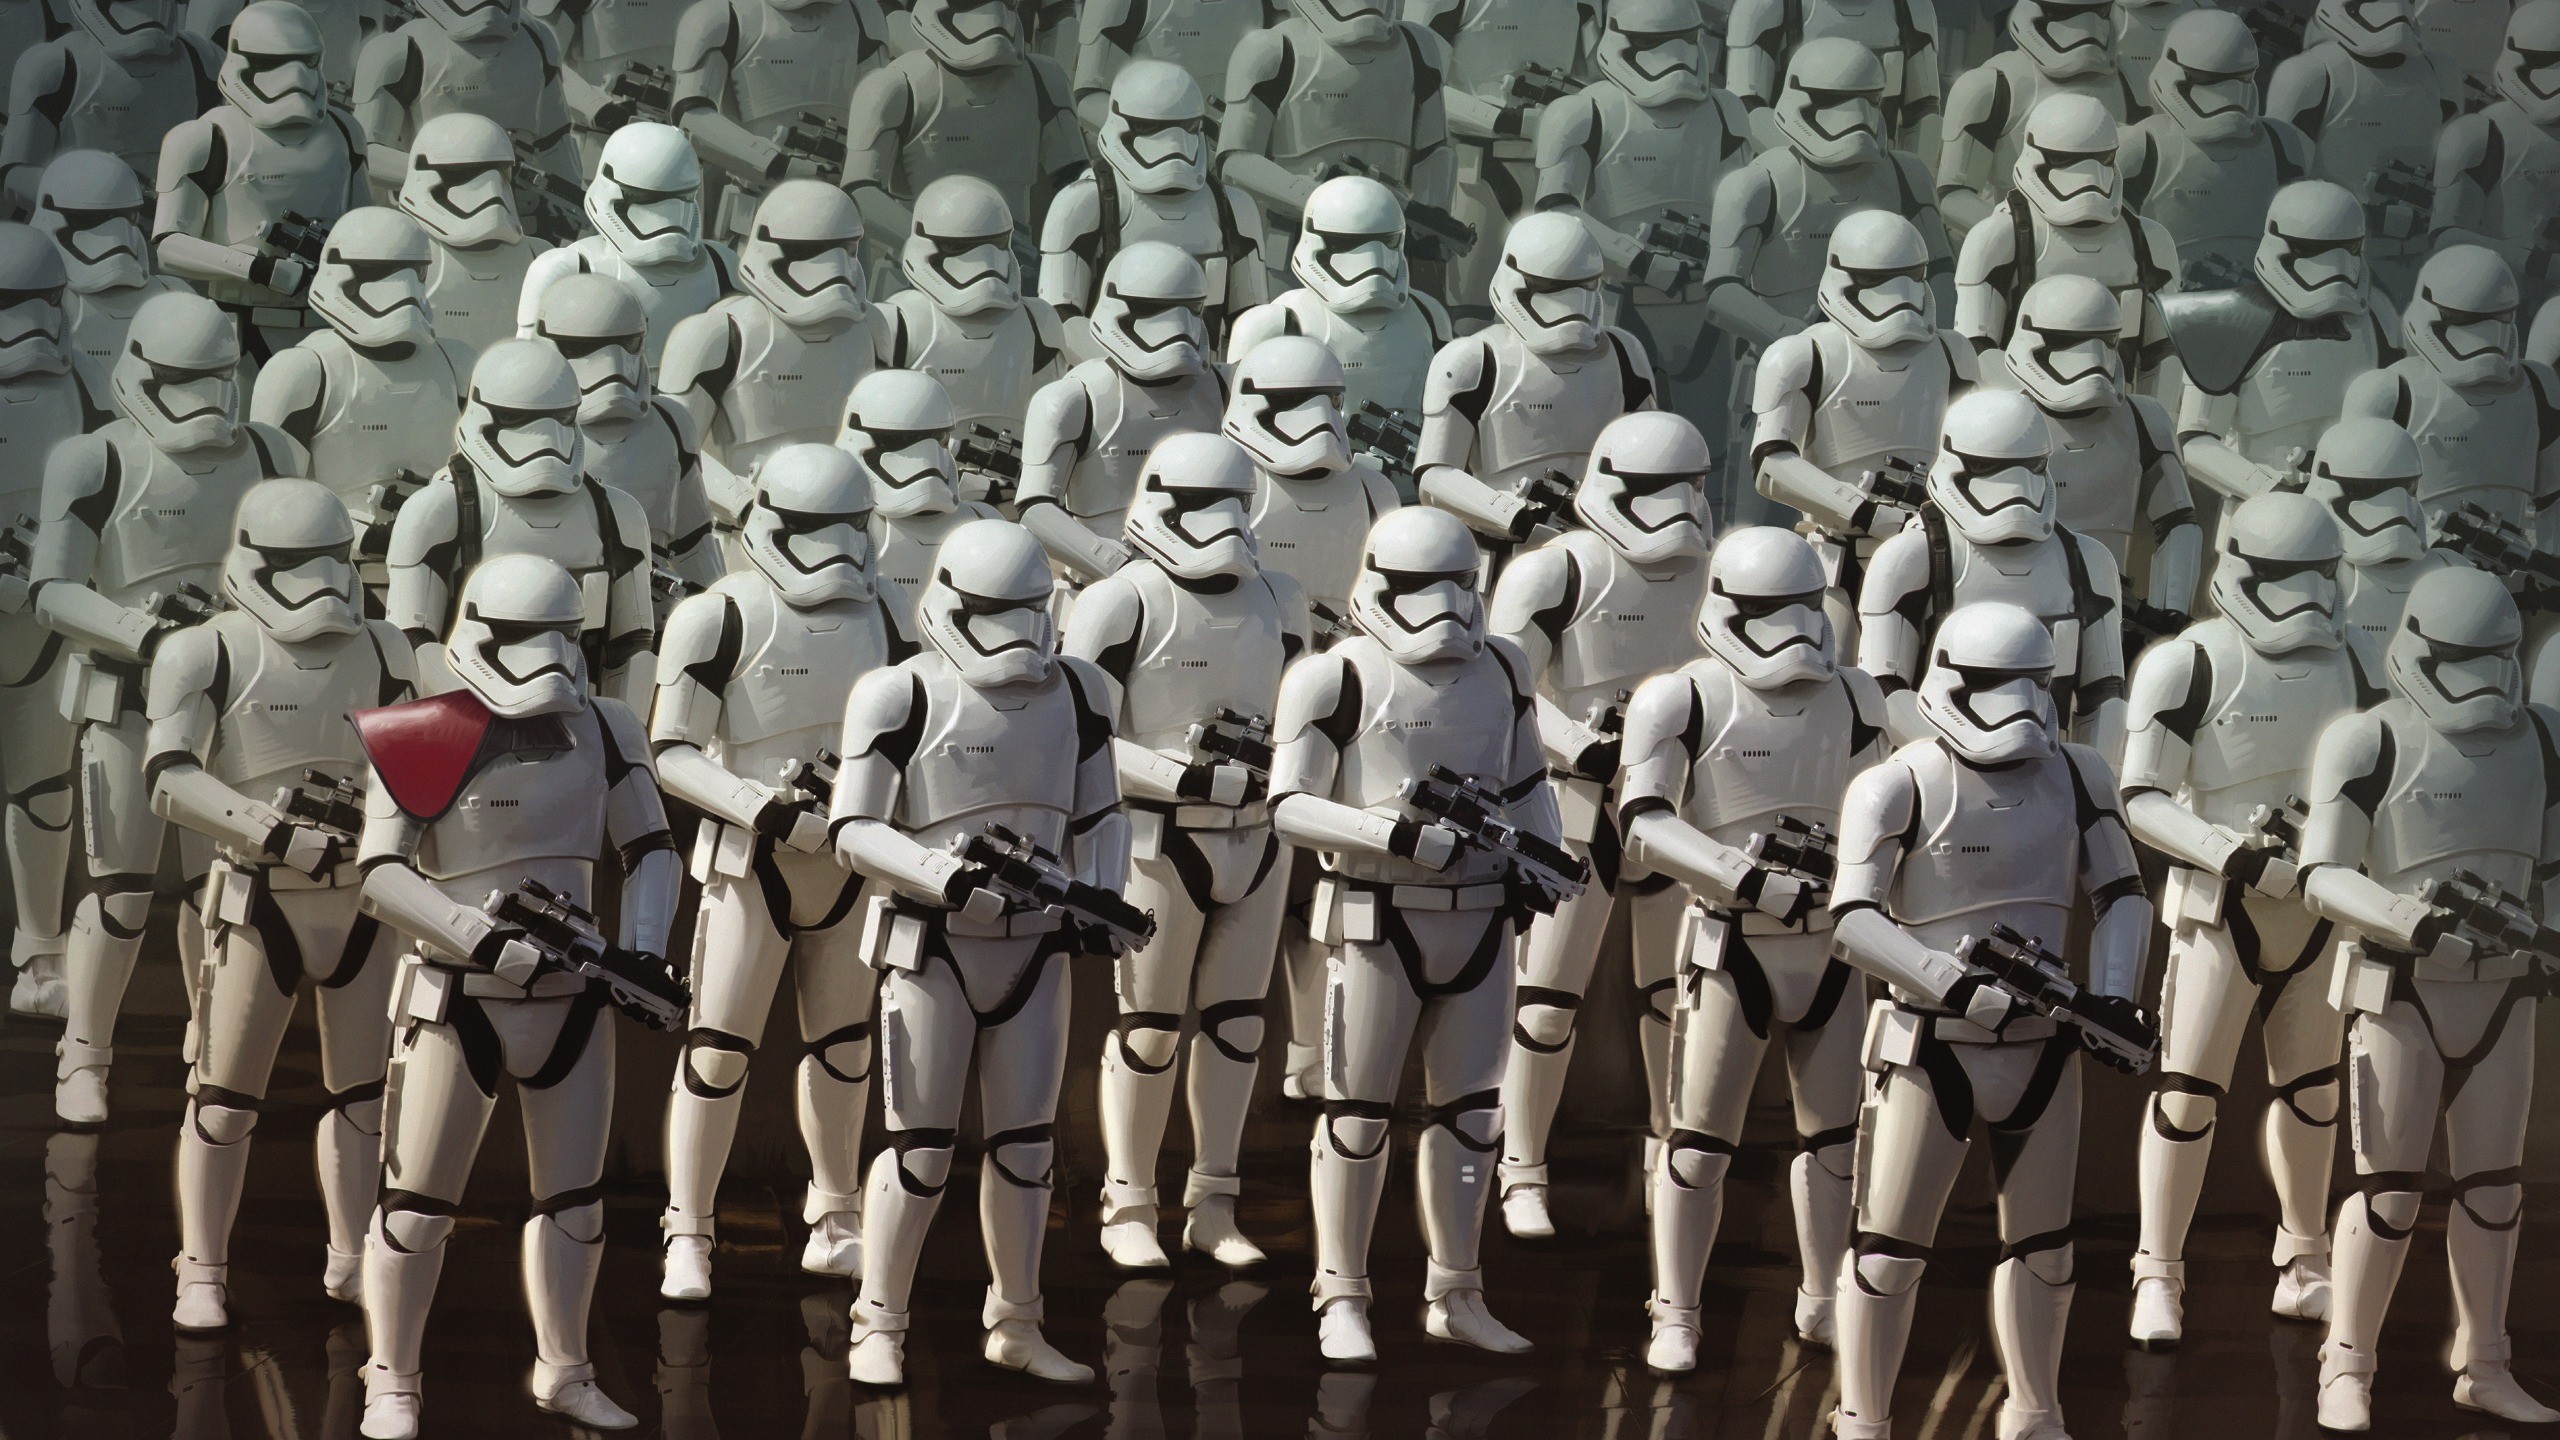 General 2560x1440 Star Wars Star Wars: The Force Awakens stormtrooper movies First Order Trooper science fiction